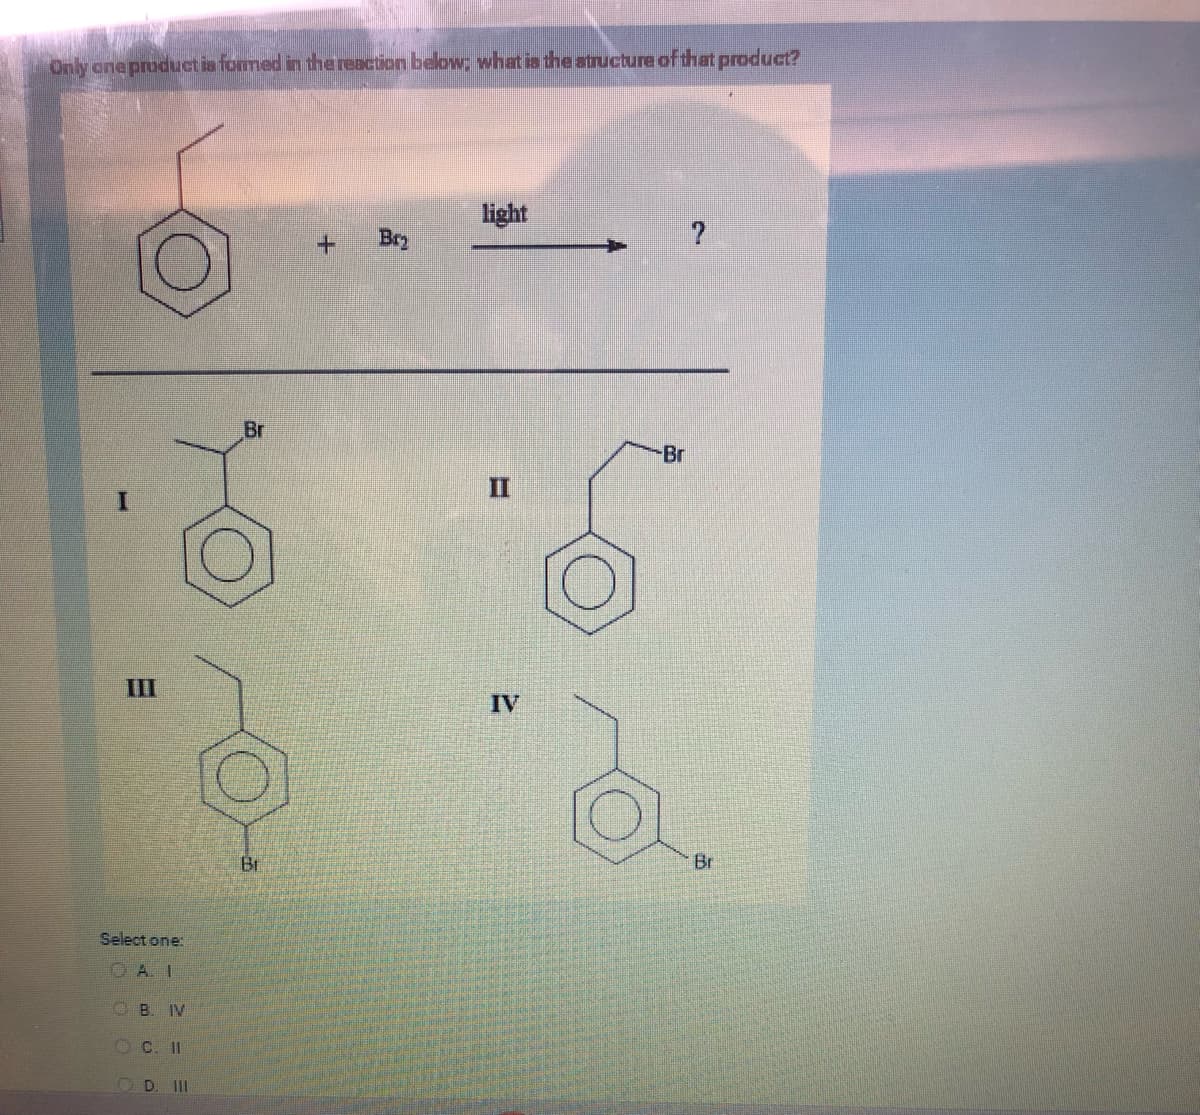 Only one product is formed in the reaction below; what is the structure of that product?
III
Select one:
CA.I
B. IV
C. II
D. III
Br
O
Bi
+ Bry
light
II
IV
-Br
Br